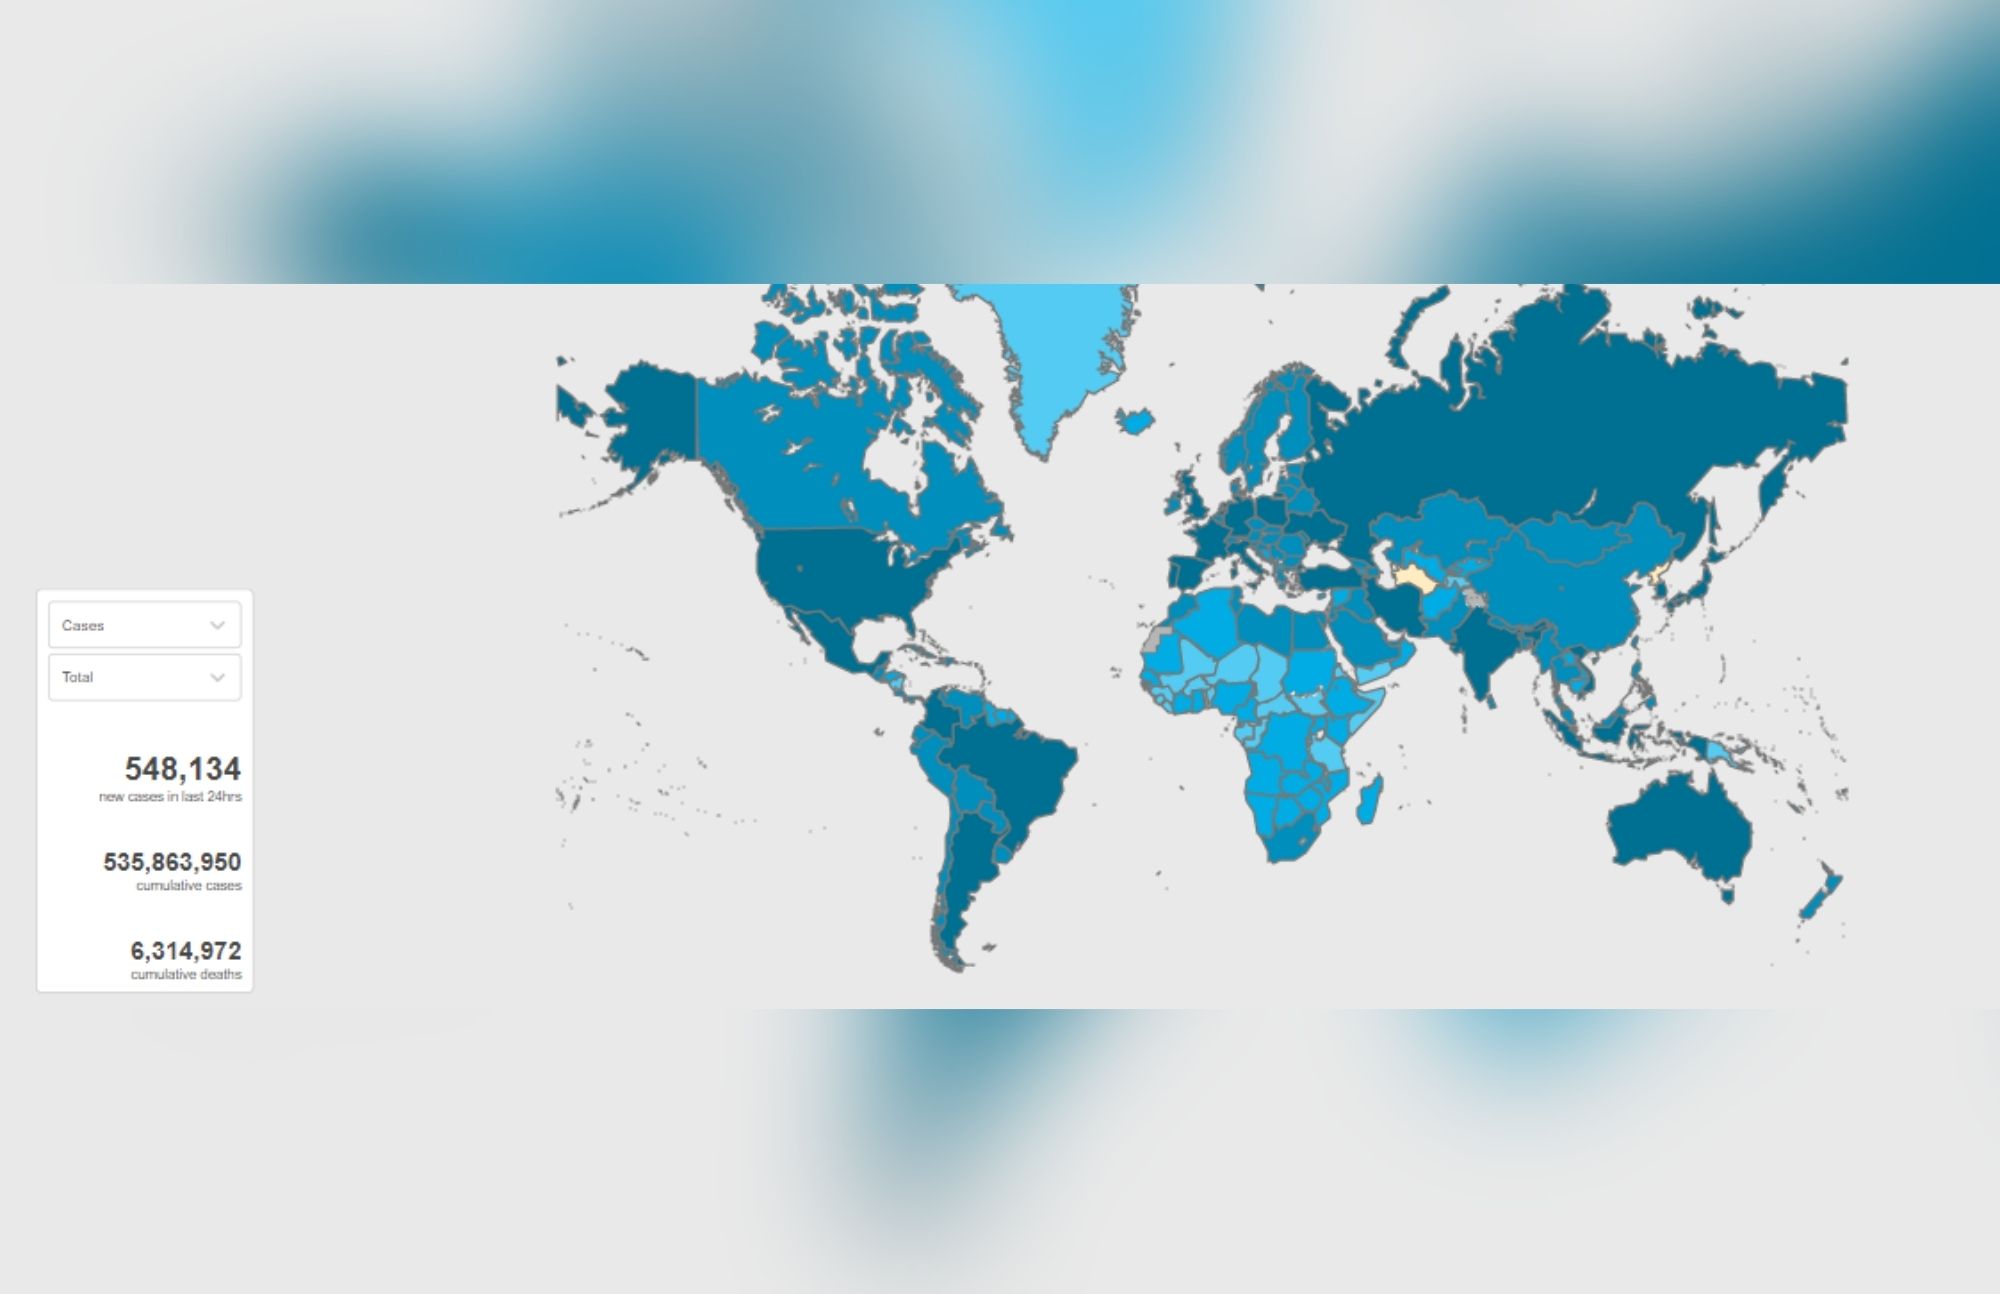 The World Health Organization (WHO) map data with numbers on the right portion